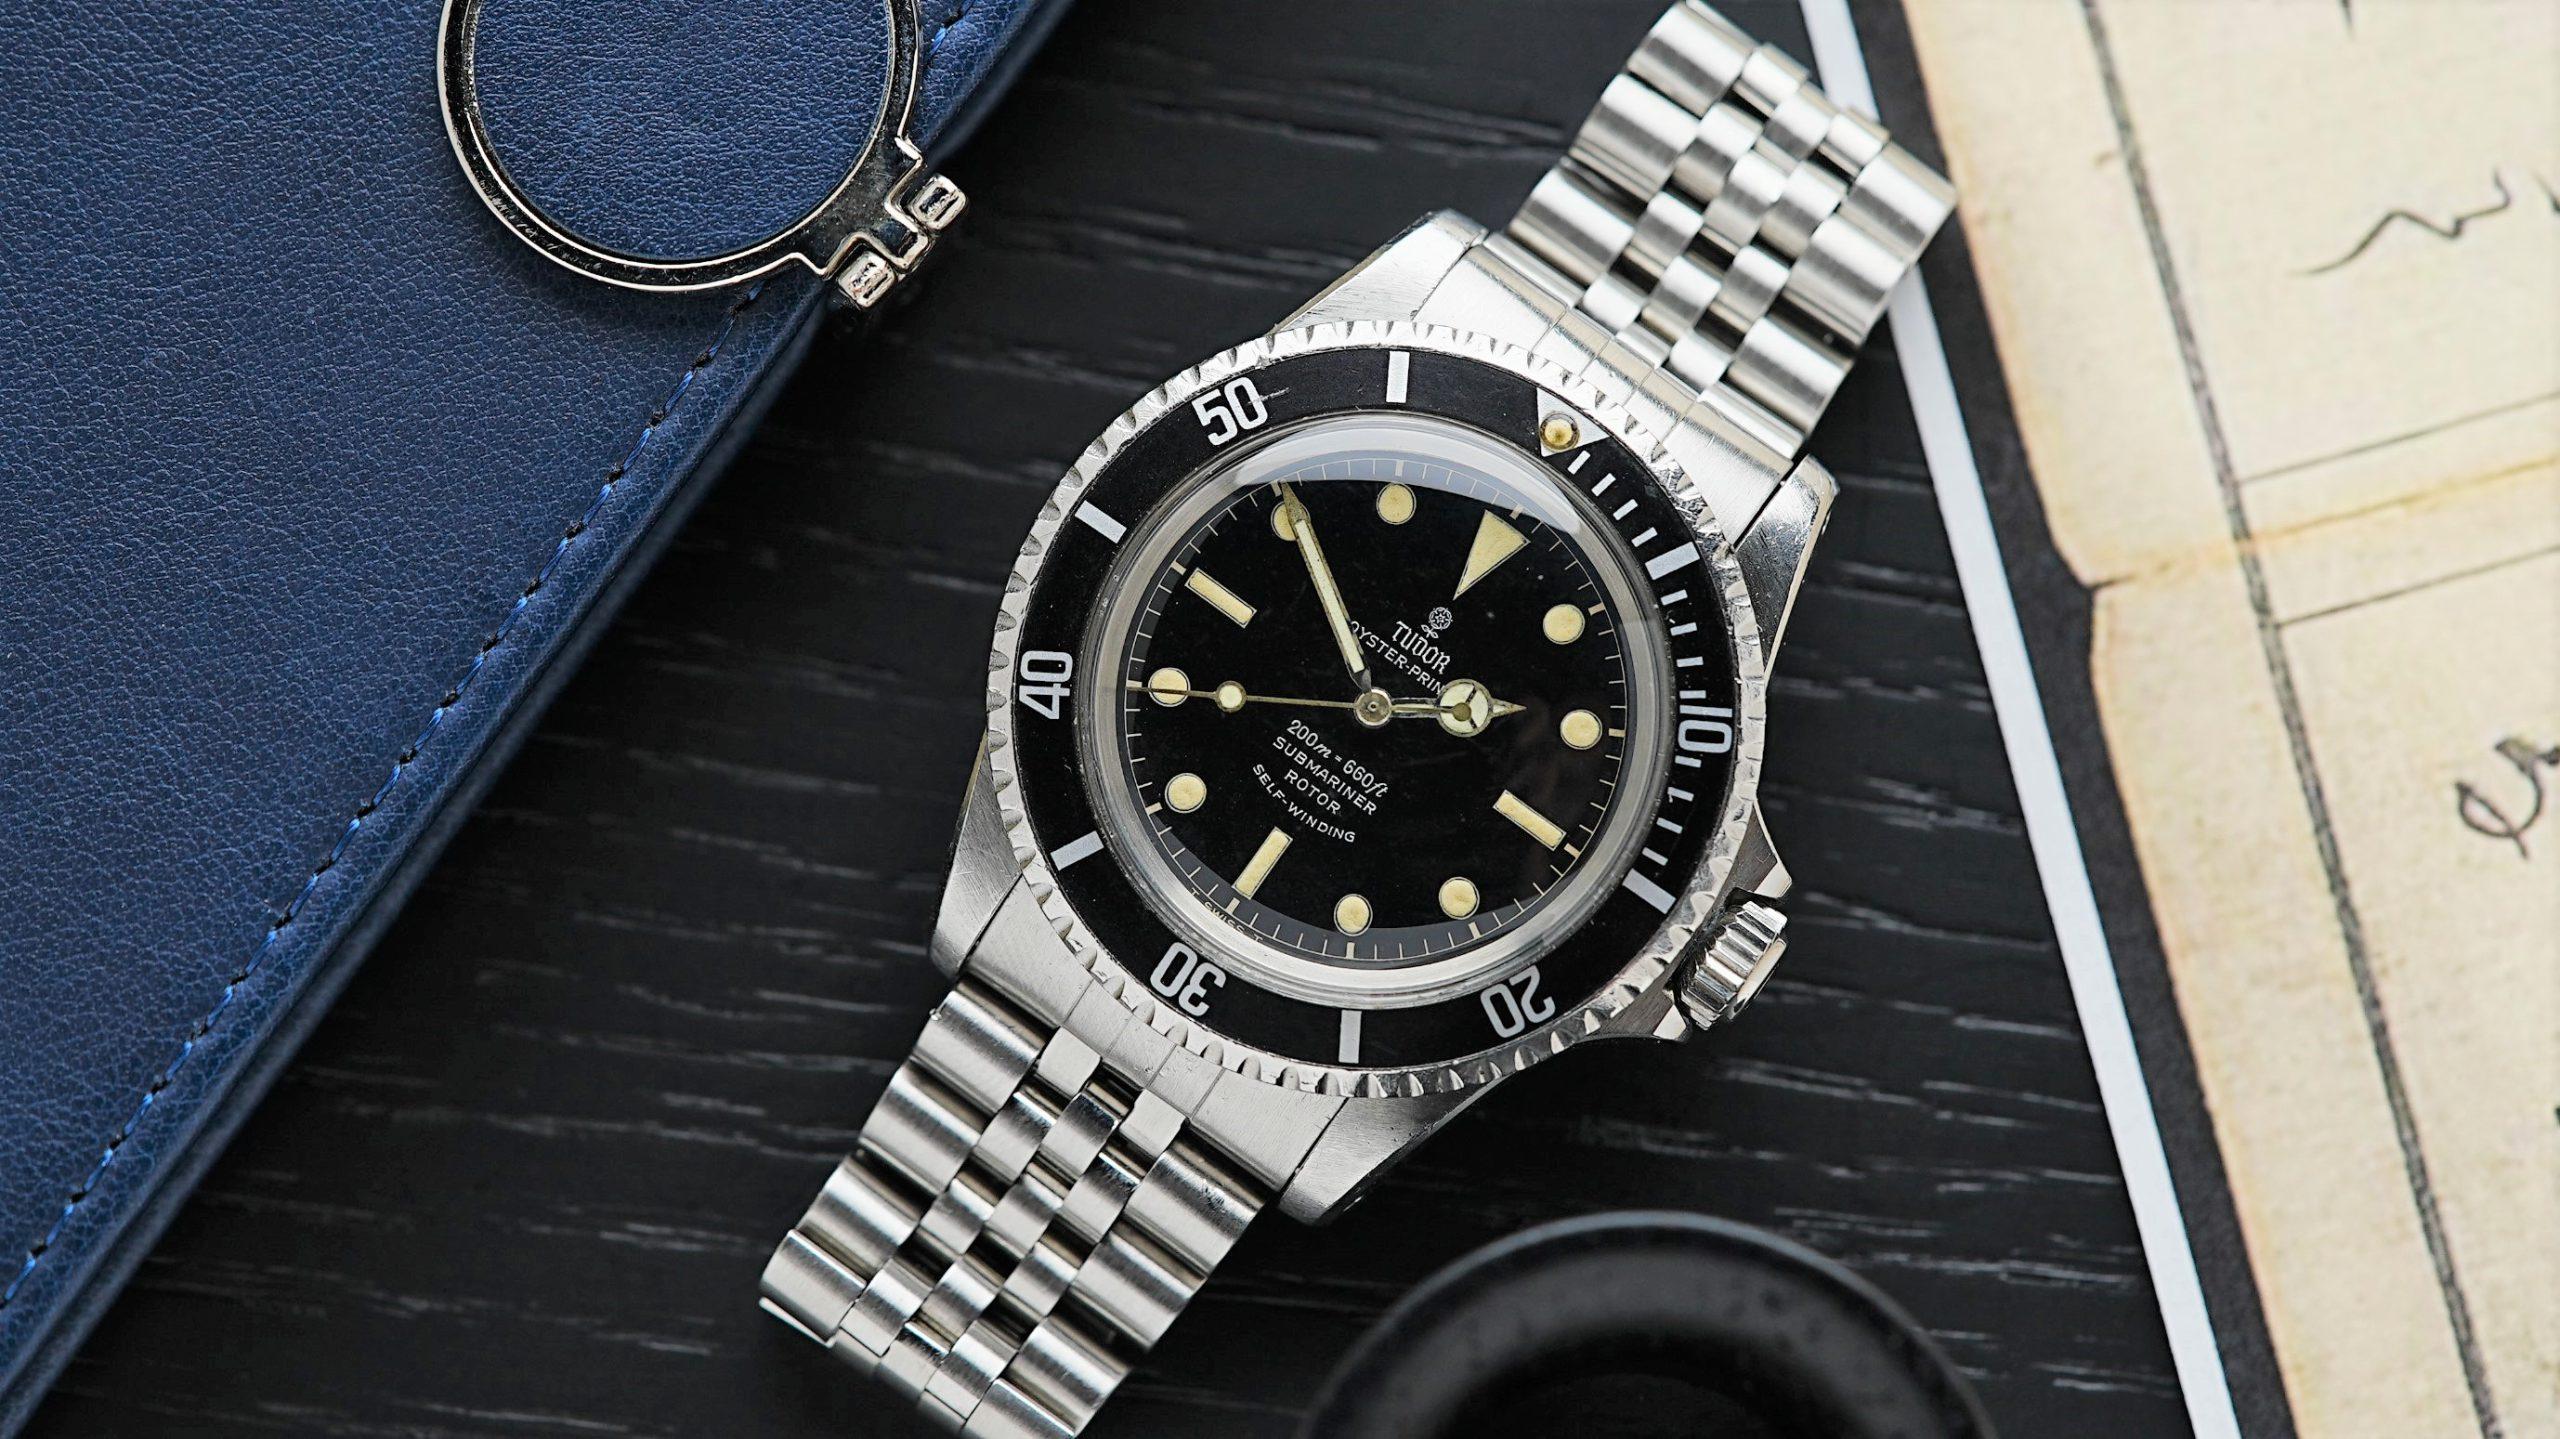 Tudor Submariner 7928 Gilt Patina featured under white light with blue notebook in background.